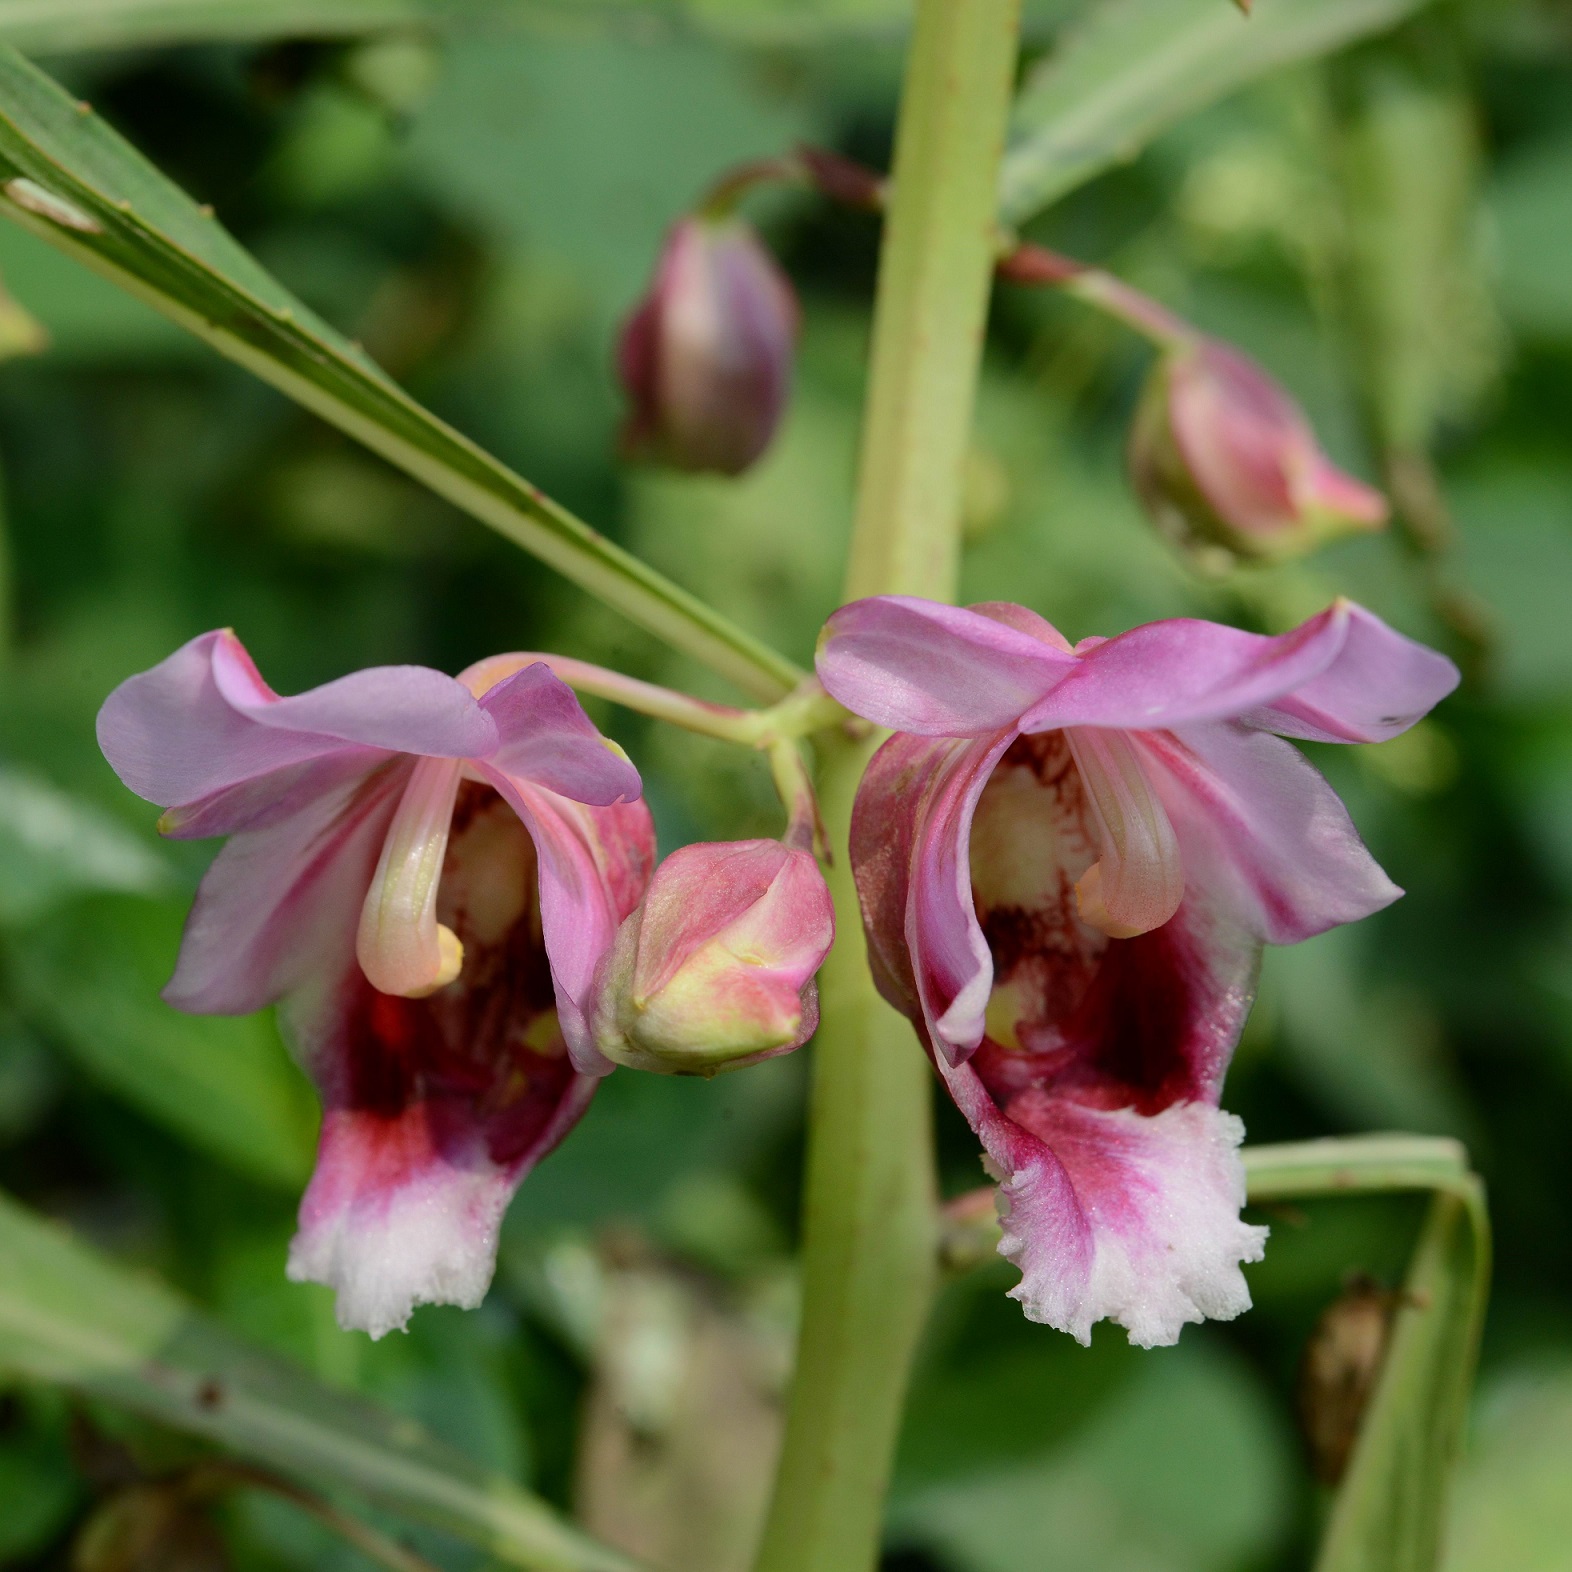 Two pink tubular flowers of Hydrocera triflora, the centres are dark pink whilst the tips of the petals are light pink